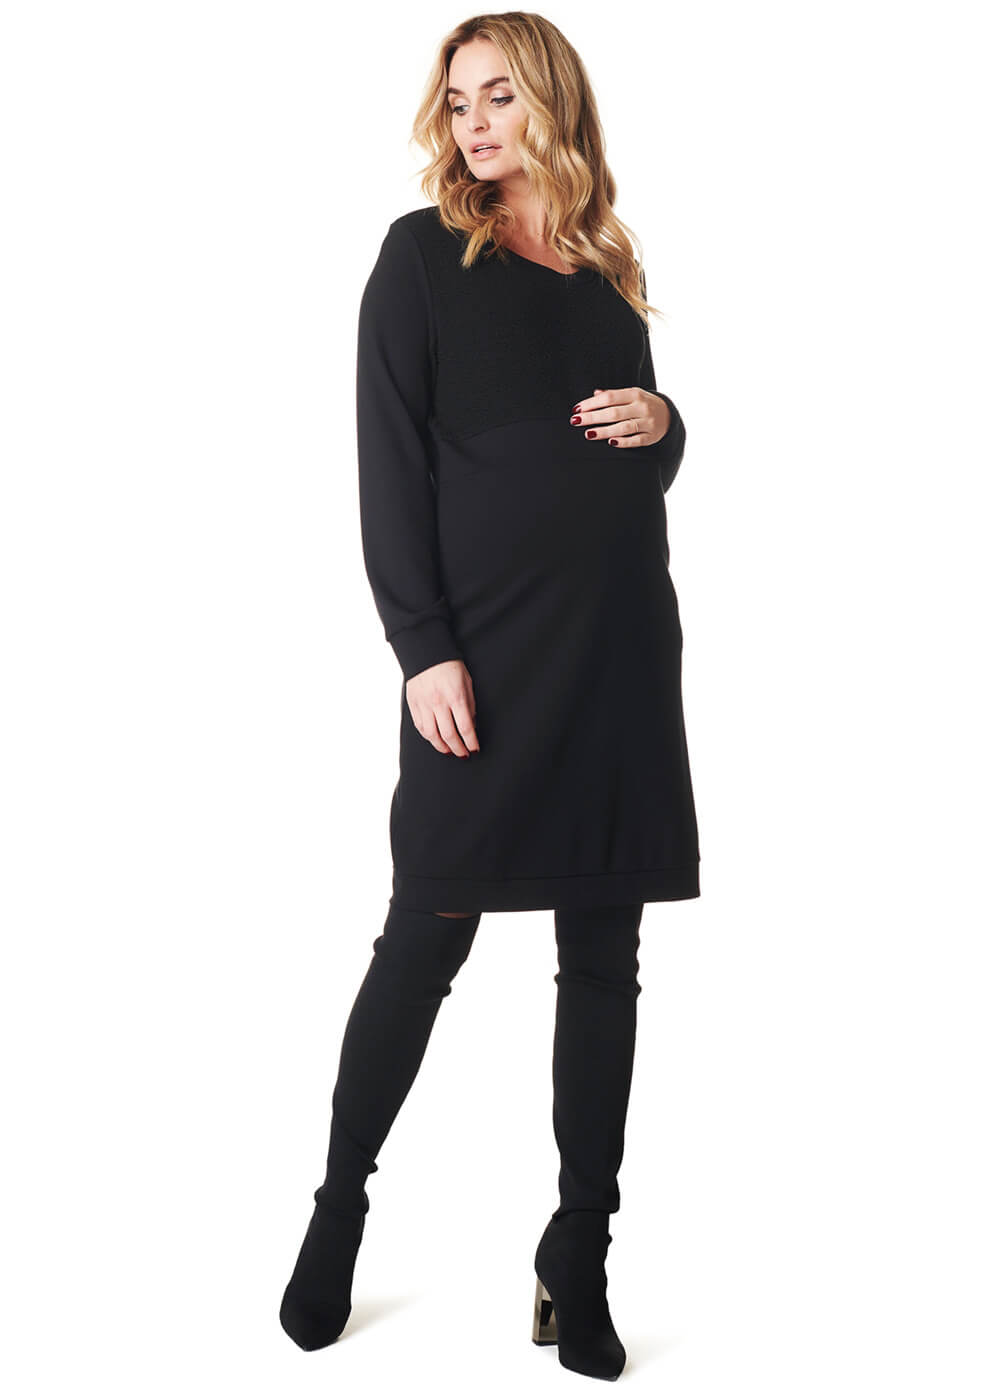 Morning Pregnancy Dress in Black by Noppies